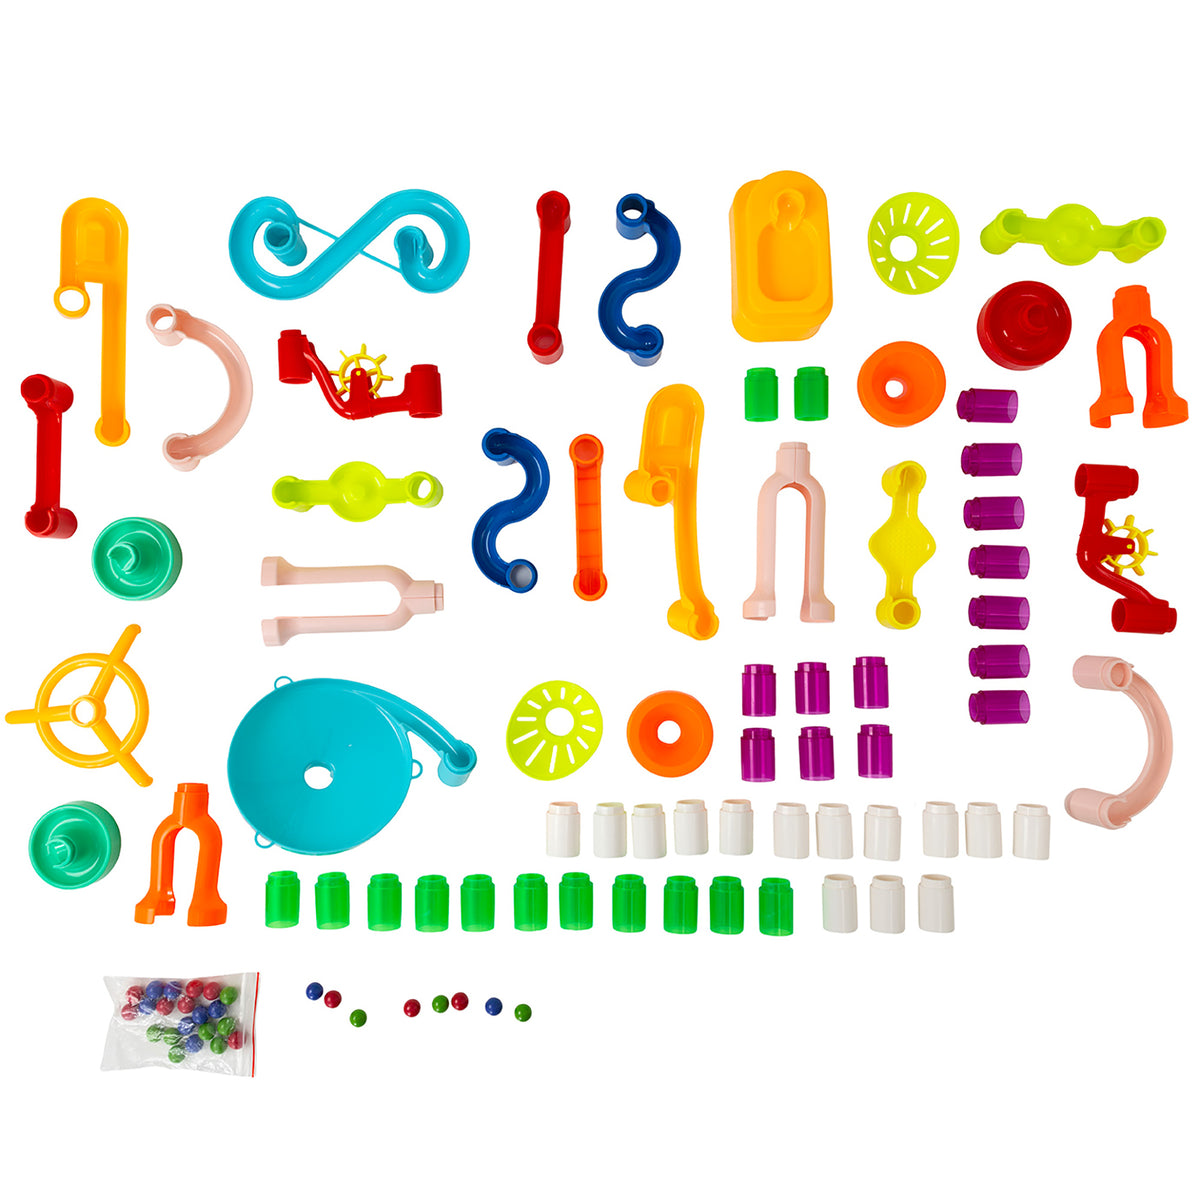 component  image of 100+ piece Marble Run from HTI